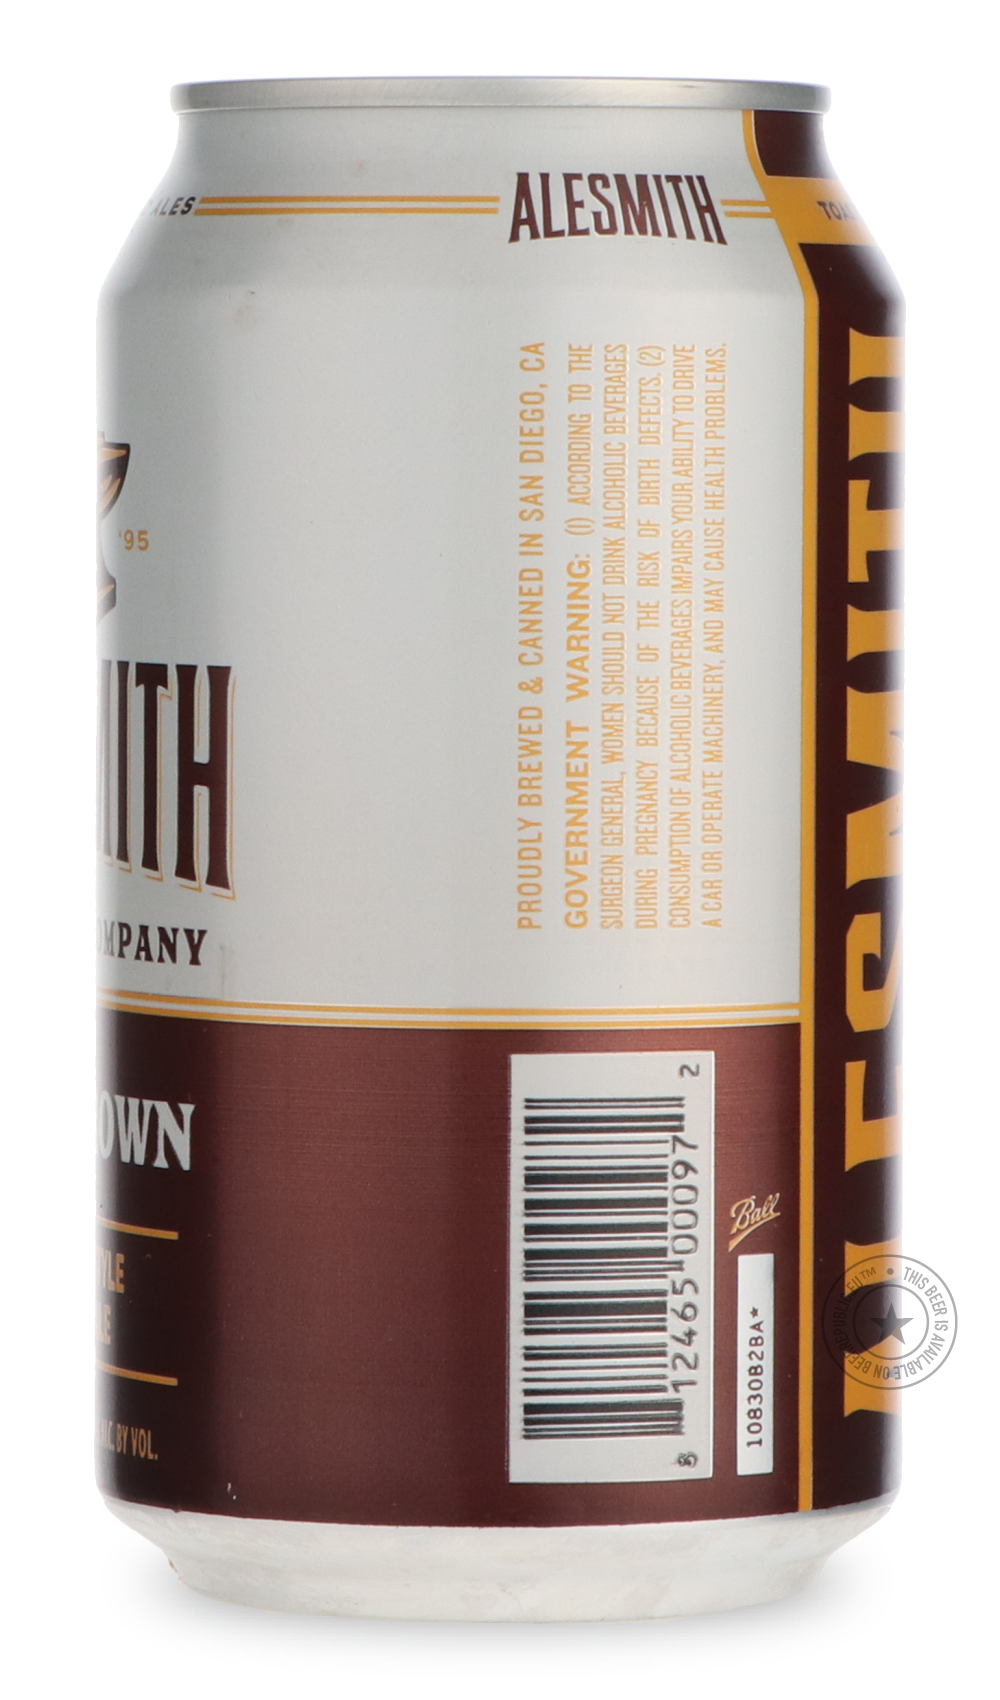 -AleSmith- Nut Brown Ale-Brown & Dark- Only @ Beer Republic - The best online beer store for American & Canadian craft beer - Buy beer online from the USA and Canada - Bier online kopen - Amerikaans bier kopen - Craft beer store - Craft beer kopen - Amerikanisch bier kaufen - Bier online kaufen - Acheter biere online - IPA - Stout - Porter - New England IPA - Hazy IPA - Imperial Stout - Barrel Aged - Barrel Aged Imperial Stout - Brown - Dark beer - Blond - Blonde - Pilsner - Lager - Wheat - Weizen - Amber -